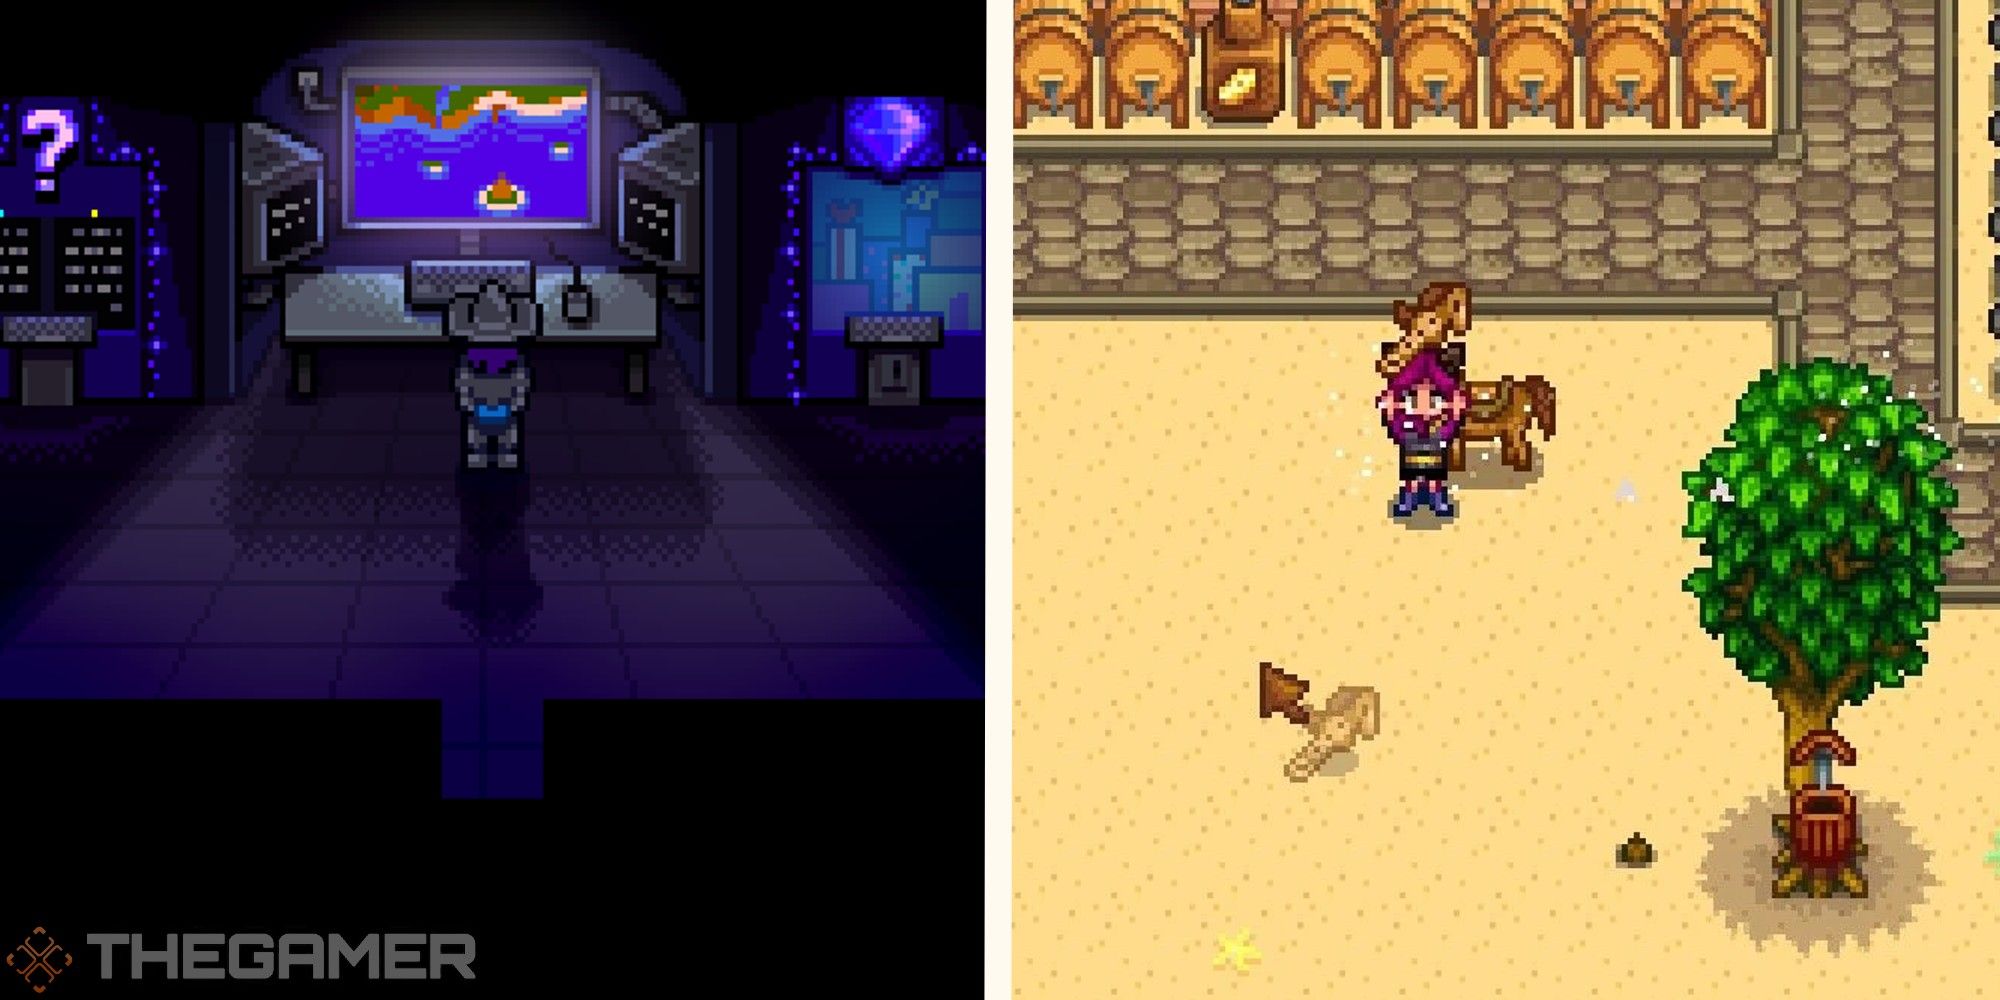 image of qi's walnut room next to image of player holding horse flute